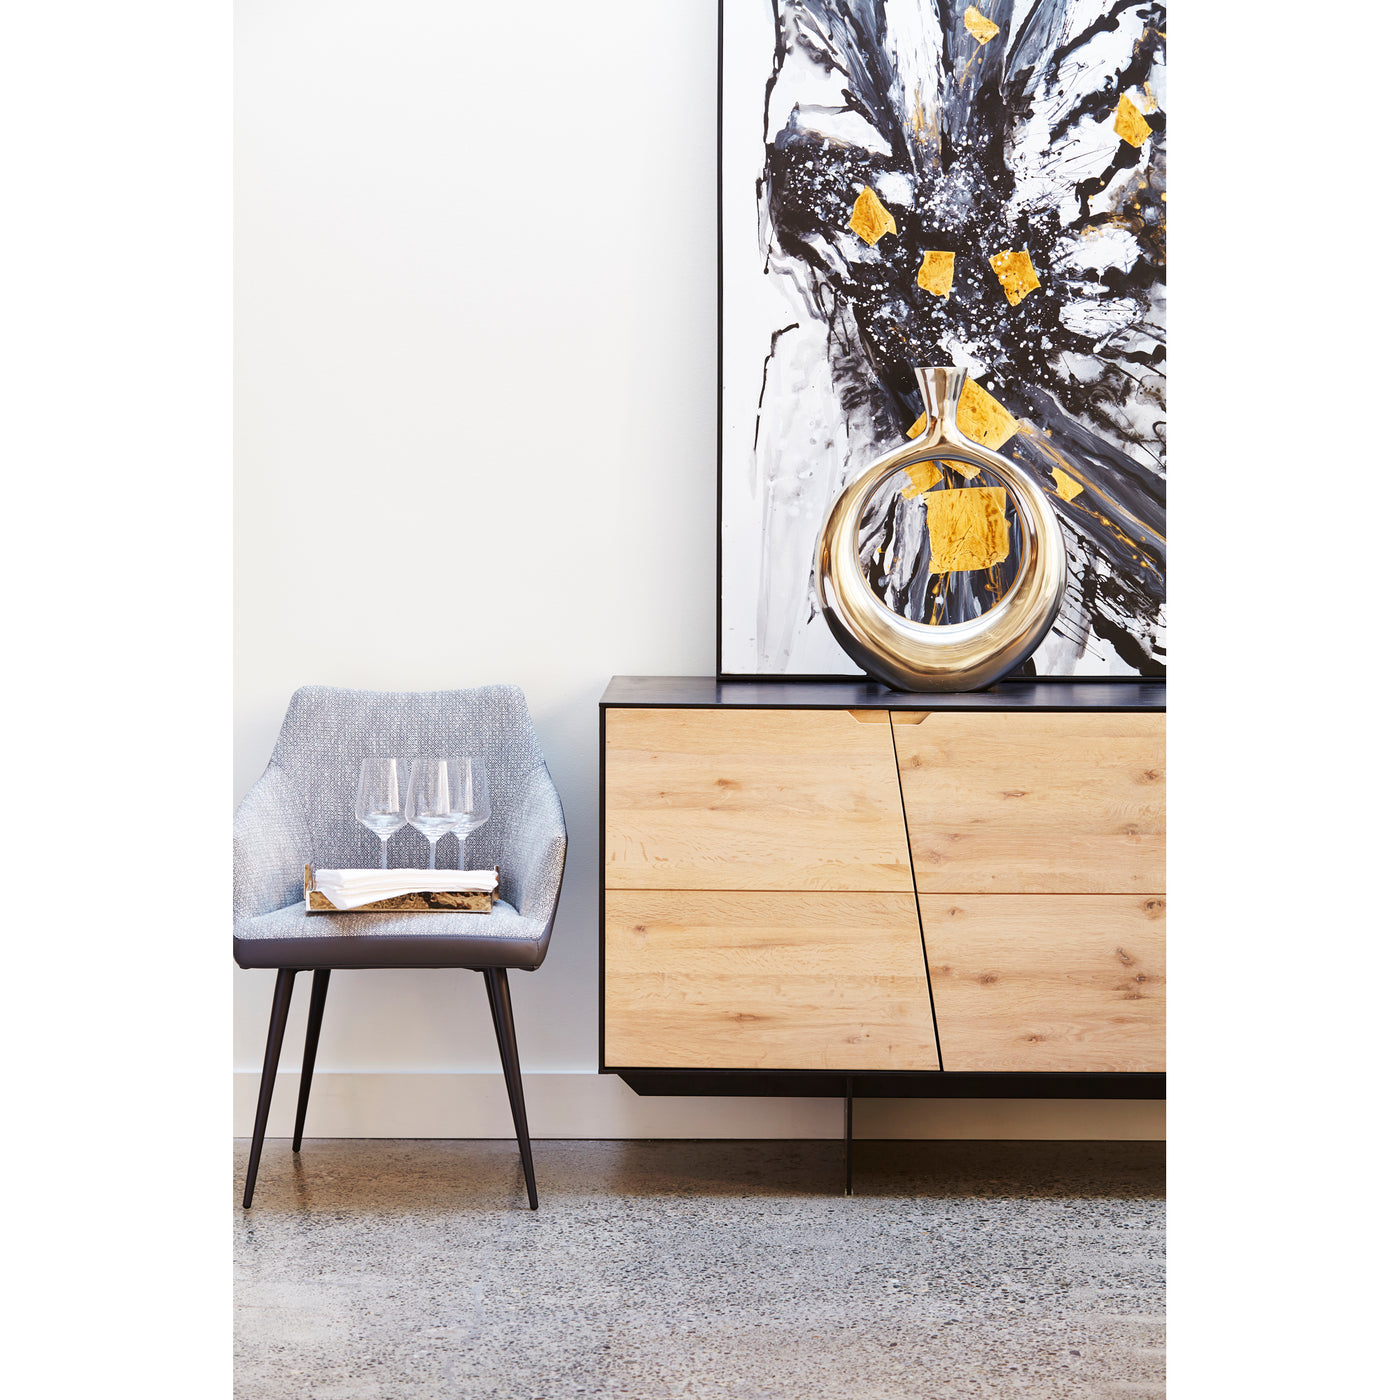 Always trust your instinct. Made from beautiful oak with a white waxed finish, this sideboard boasts a high-end designer l...